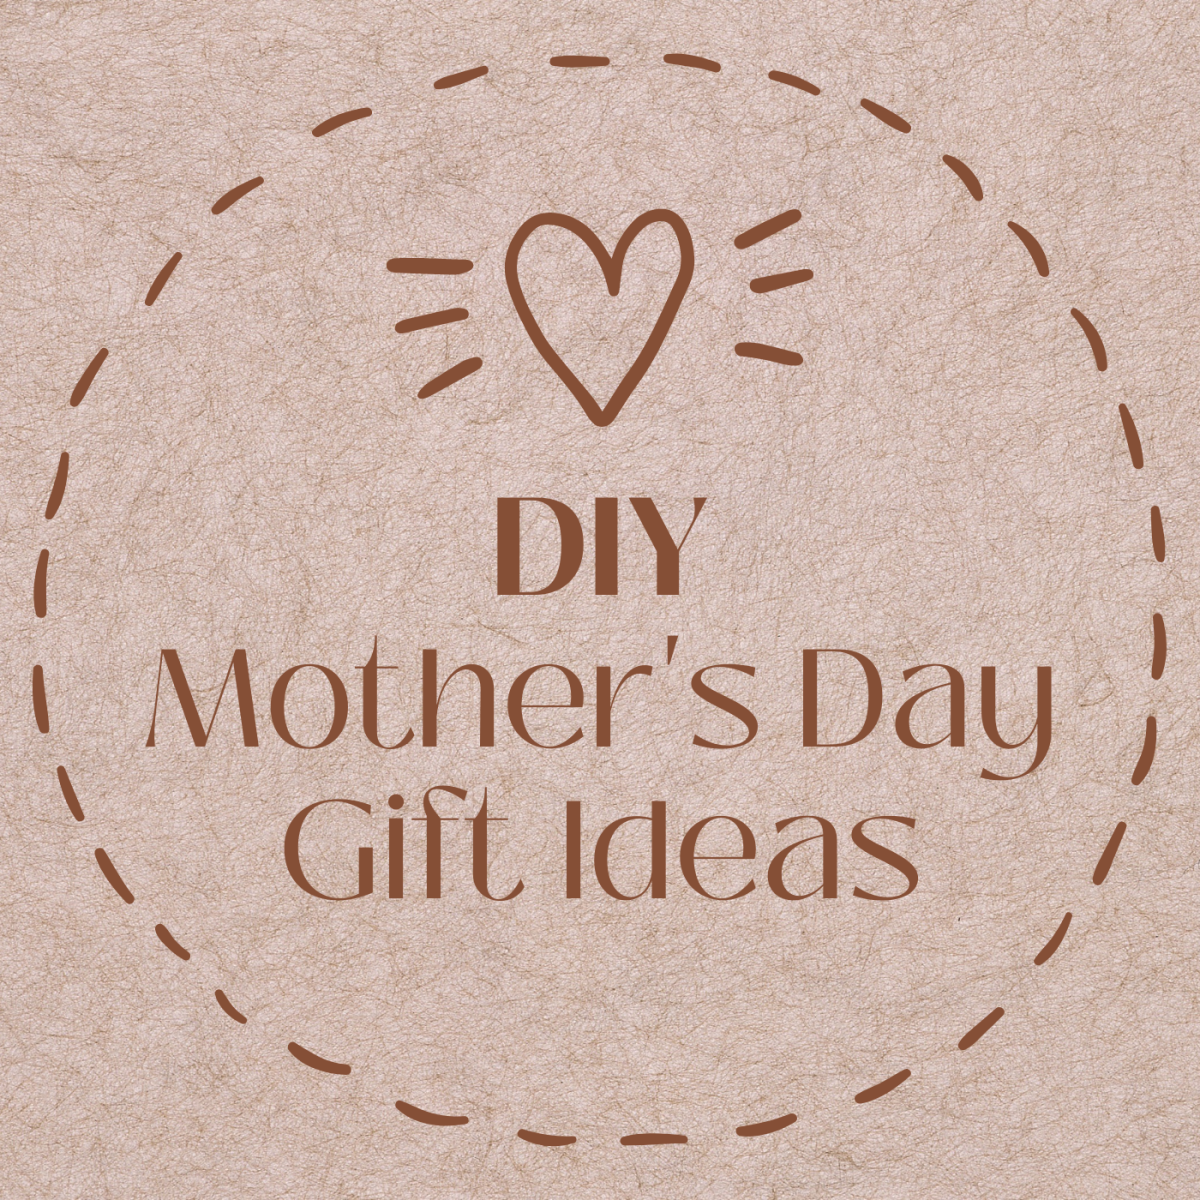 30 DIY Mother's Day Gift Ideas